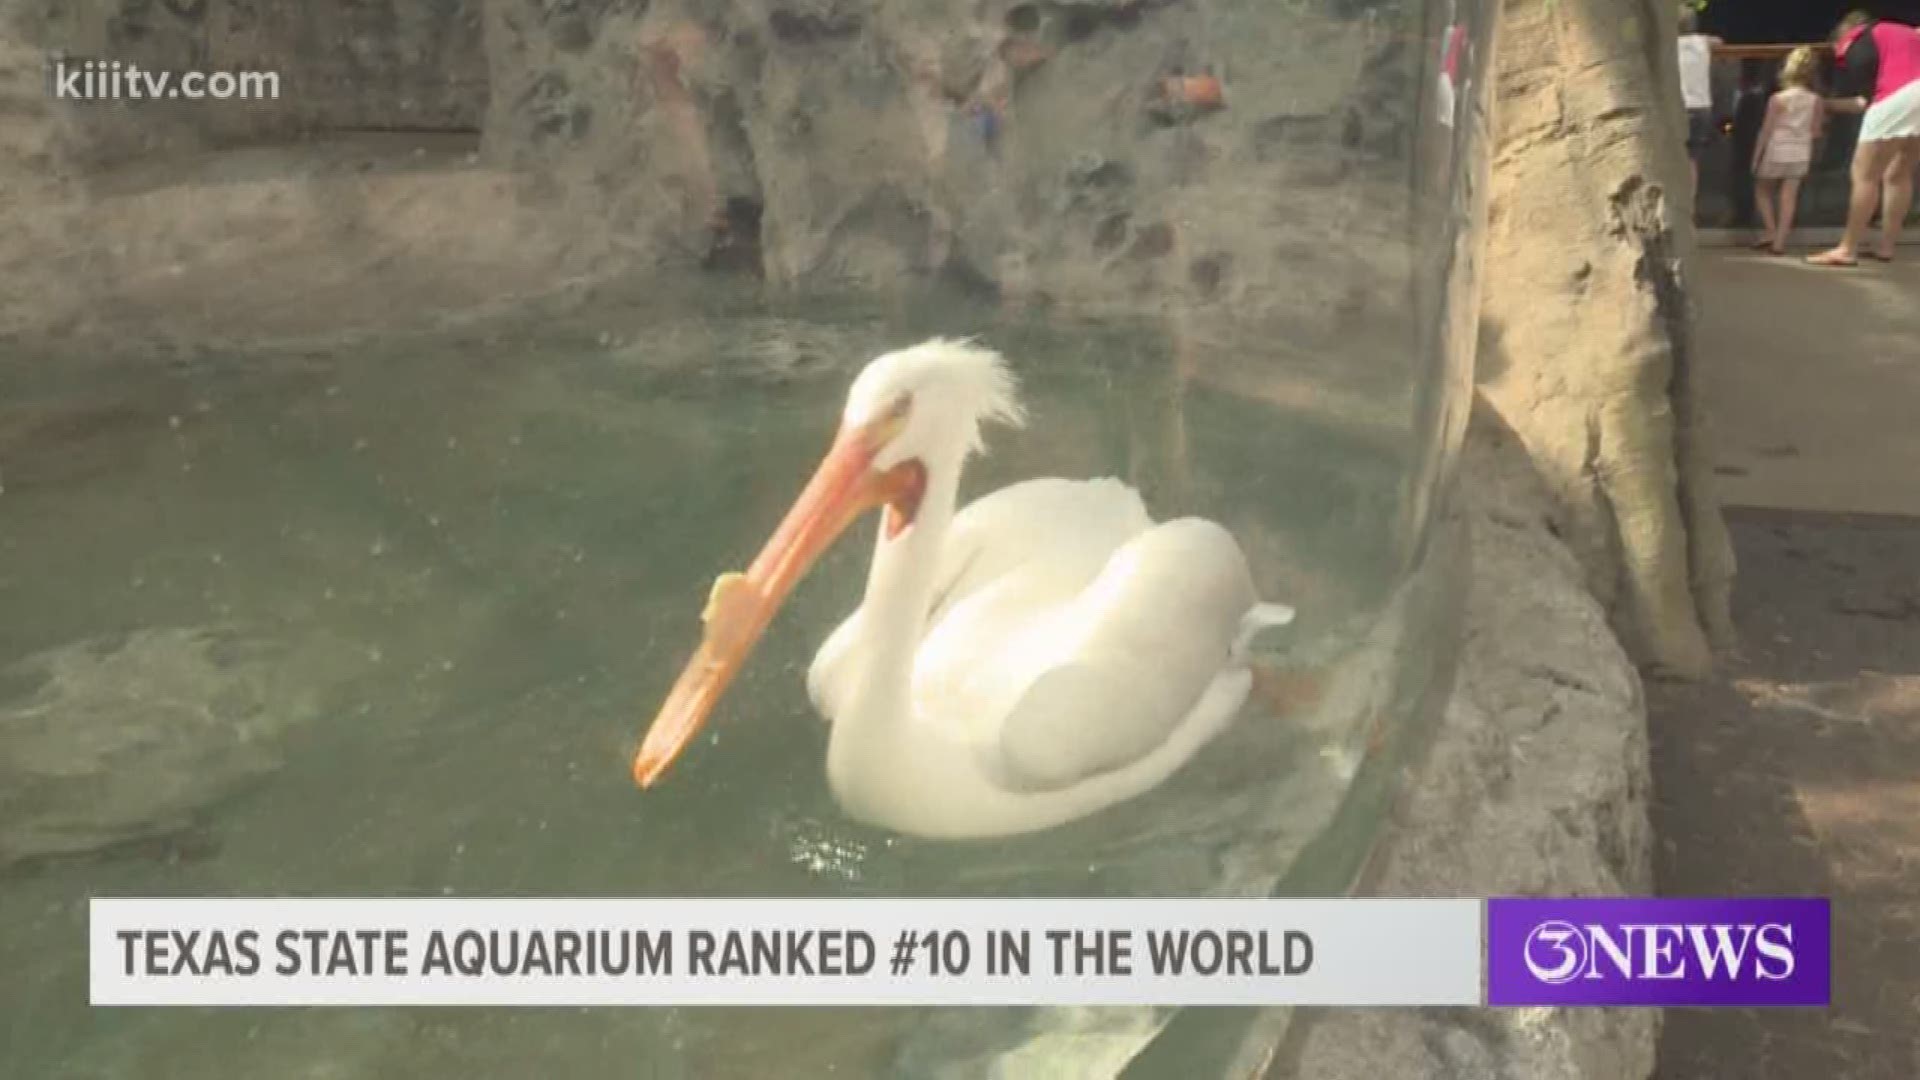 The Texas State Aquarium has received a huge recognition -- the Corpus Christi family attraction has been named one of the 10 best aquariums in the world!

Texas State Aquarium CEO Tom Schmid joined 3News at 5 p.m. to discuss what this special recognition means for the Aquarium and for the Coastal Bend.